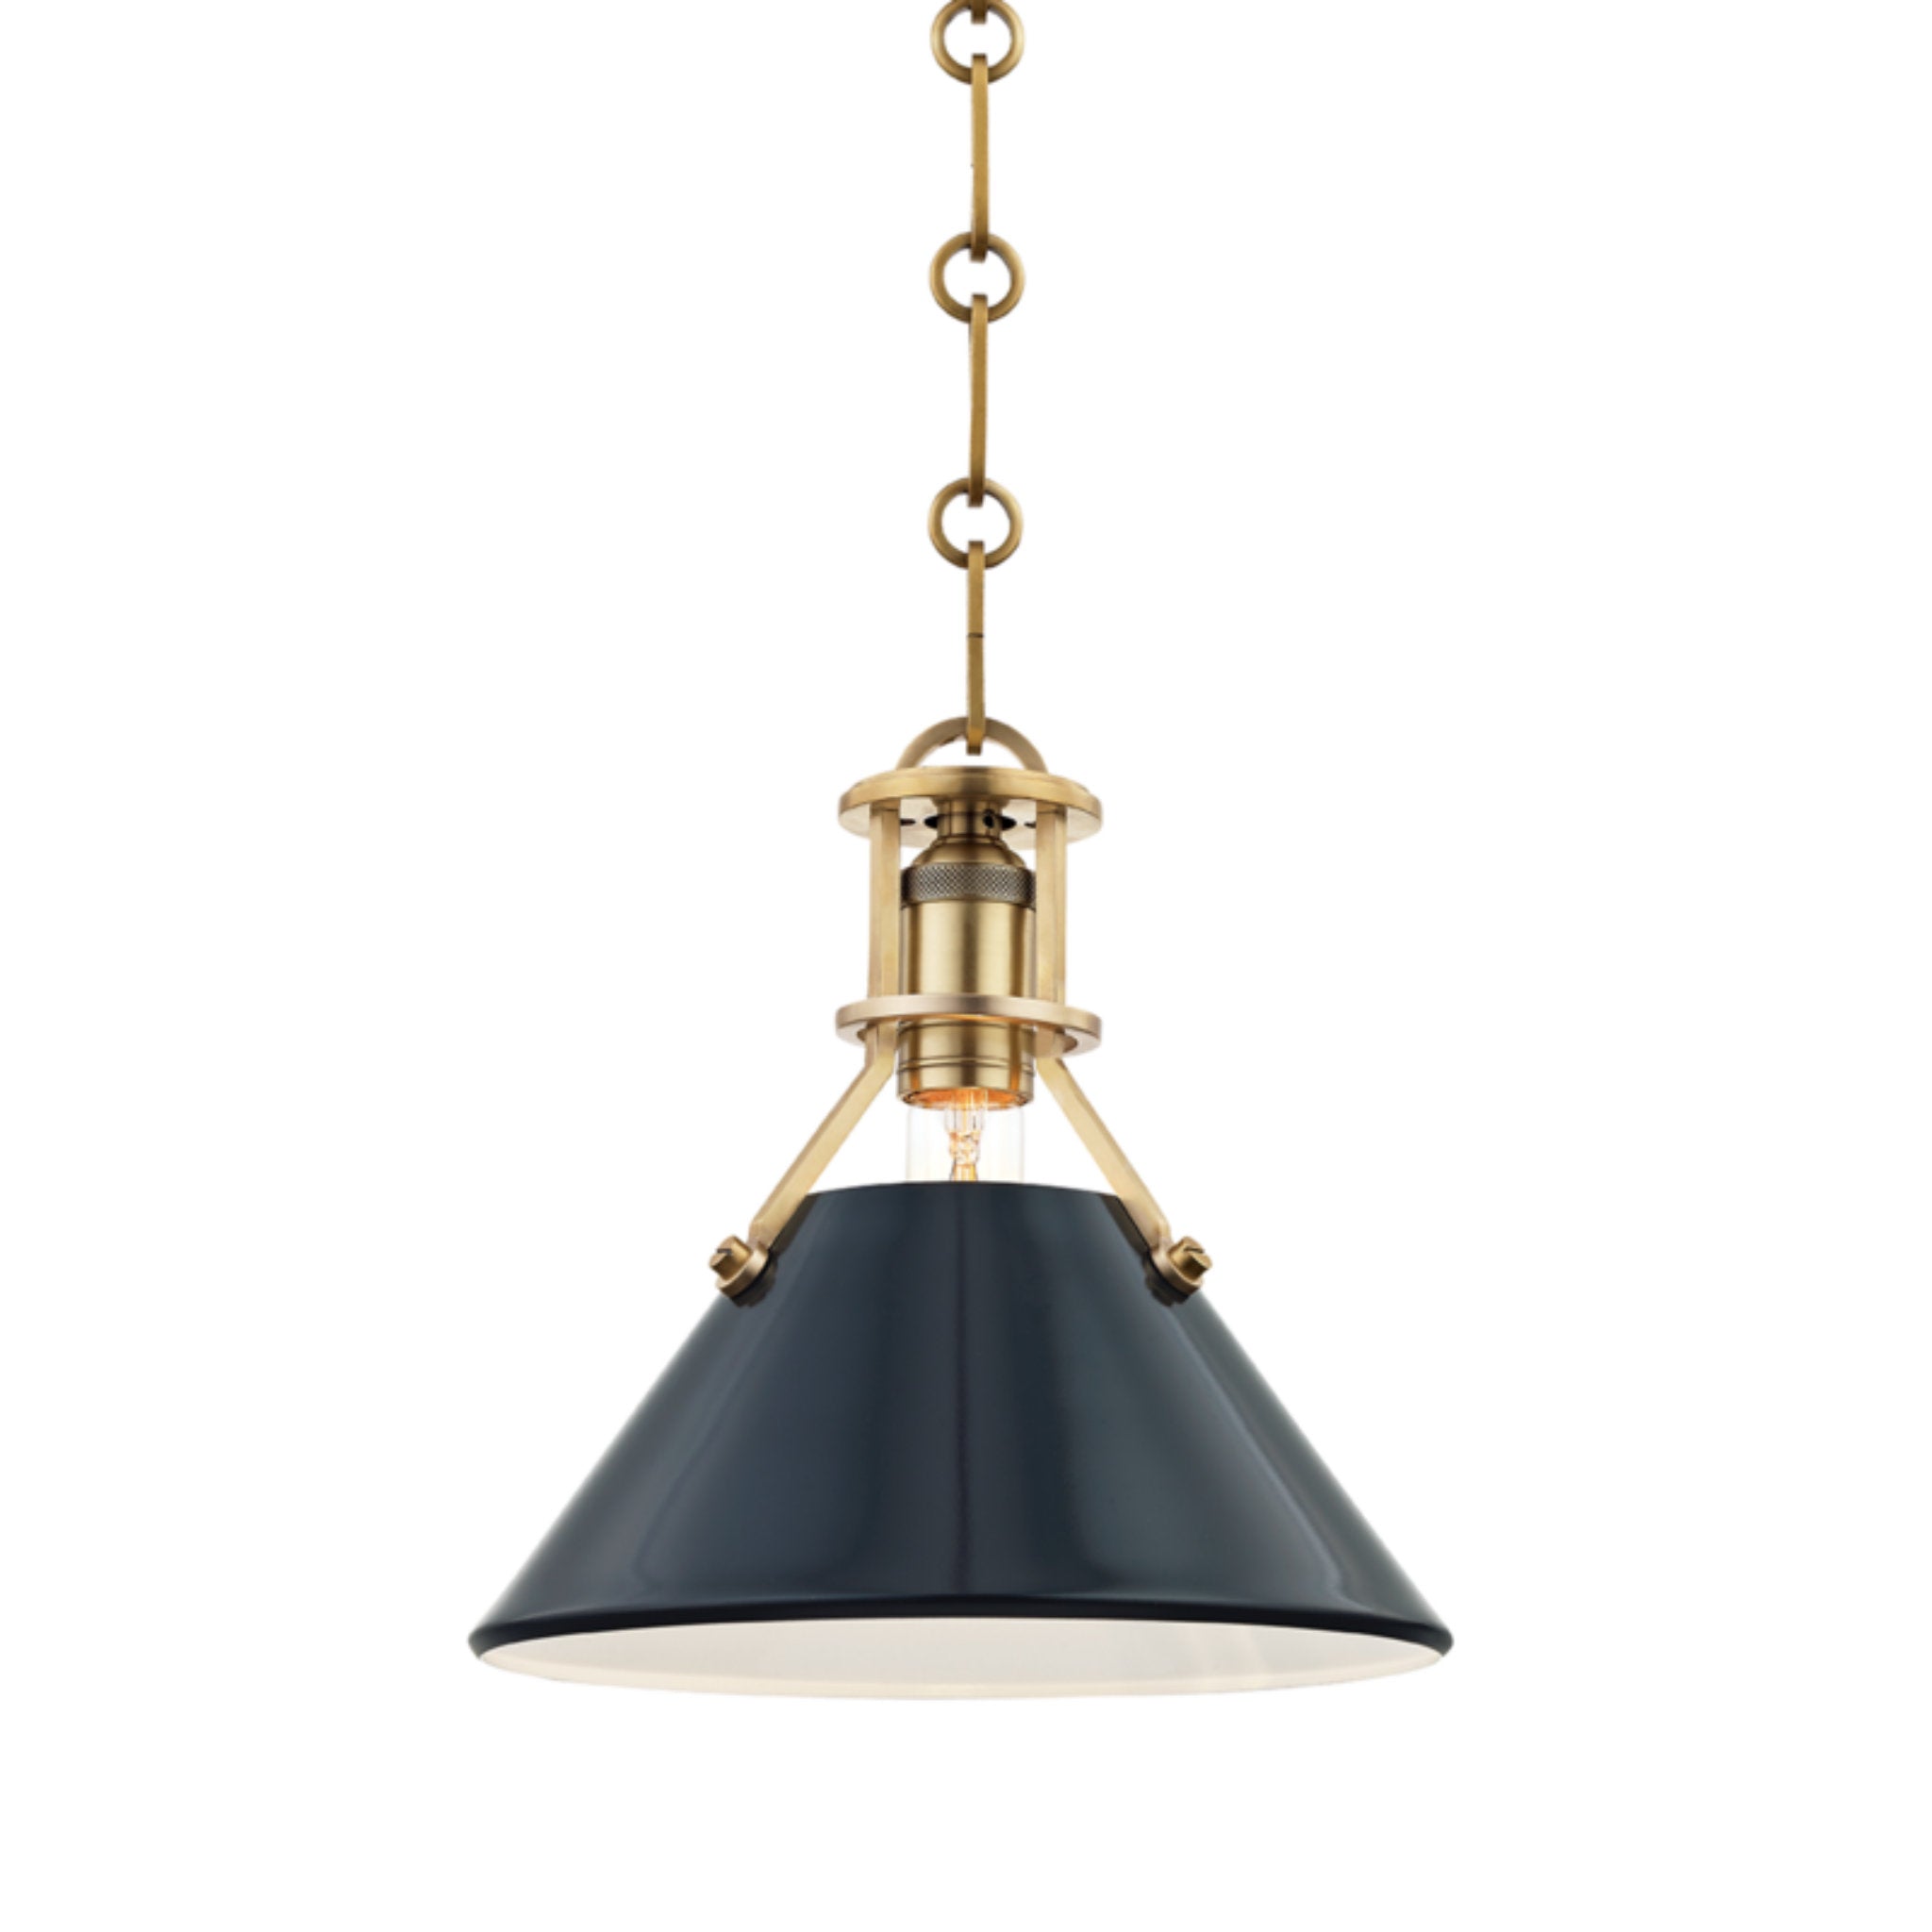 Painted No.2 1 Light Pendant in Aged Brass/darkest Blue by Mark D. Sikes